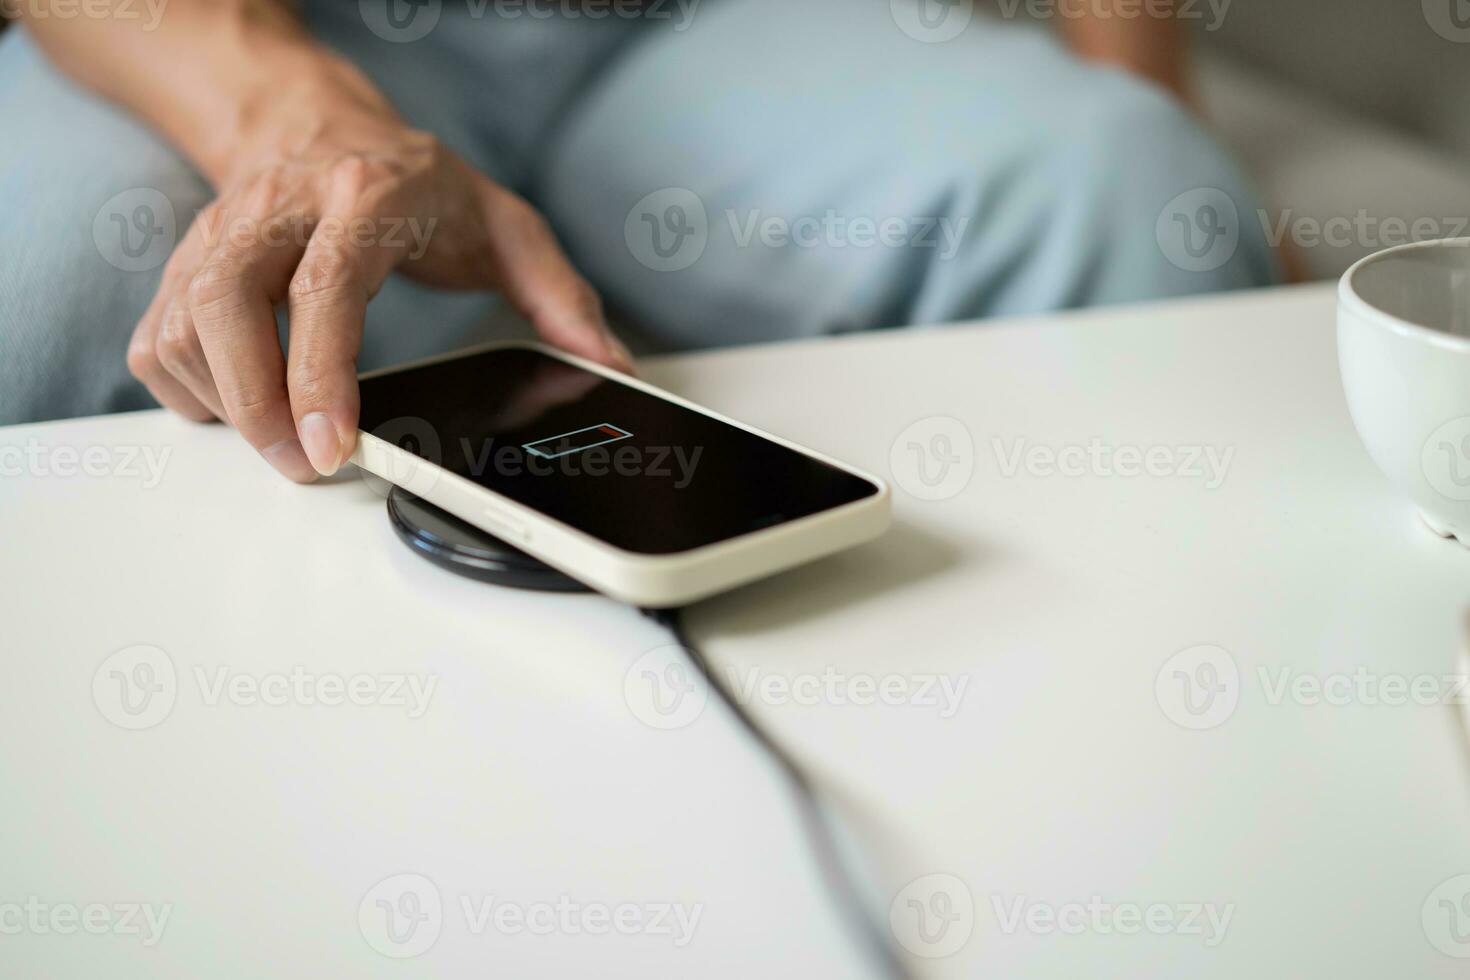 Charging mobile phone battery with wireless charging device in the table. Smartphone charging on a charging pad. Mobile phone near wireless charger Modern lifestyle technology concept. photo